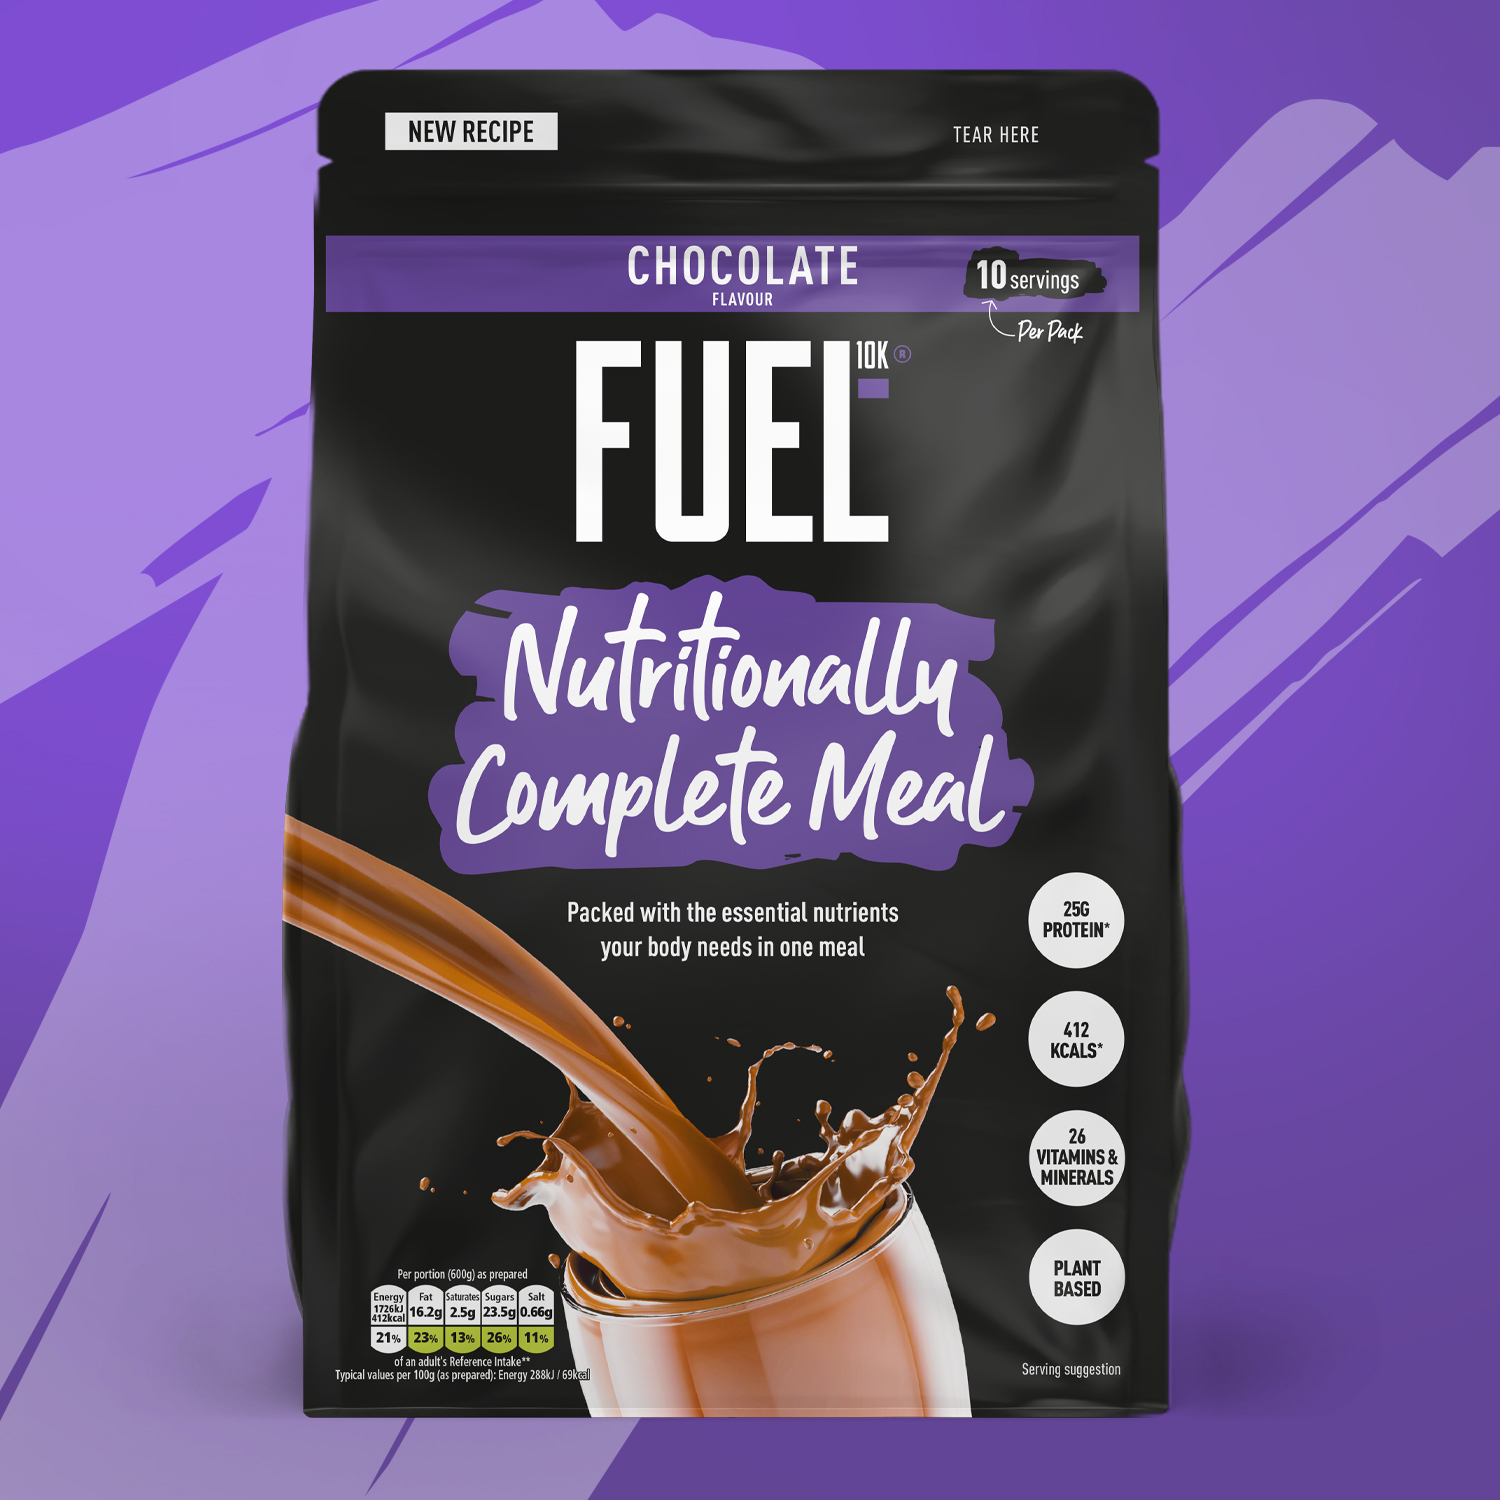 FUEL10K. Shop Nutritionally Complete Meal Shake - Chocolate flavour